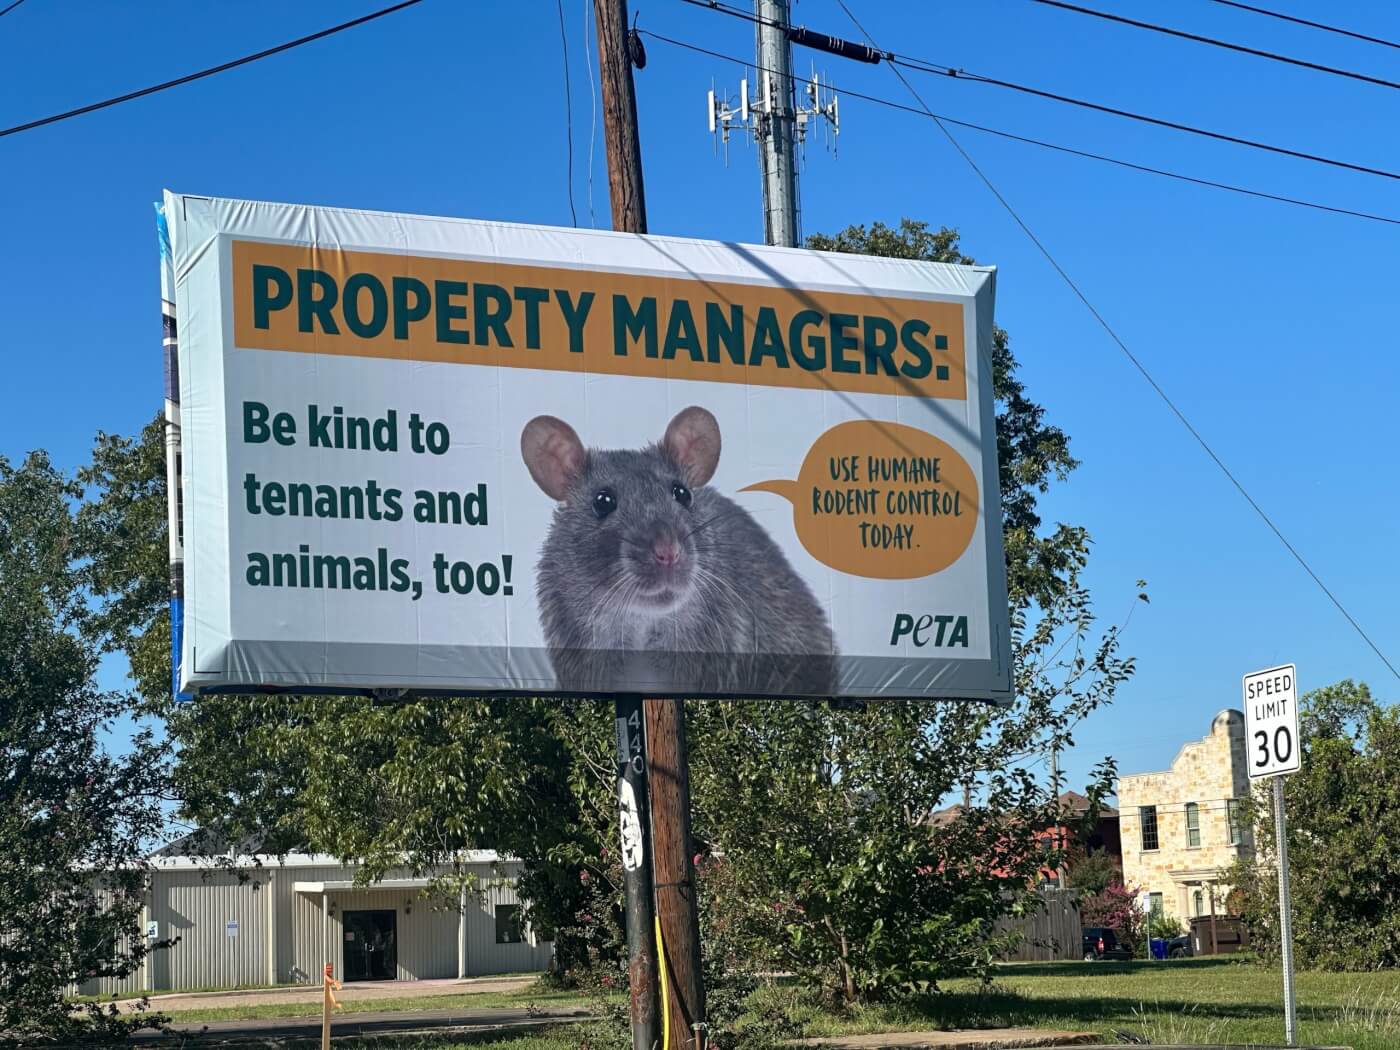 Photo of humane rodent control billboard with text reading property managers be kind to tenants and animals too, use humane rodent control today